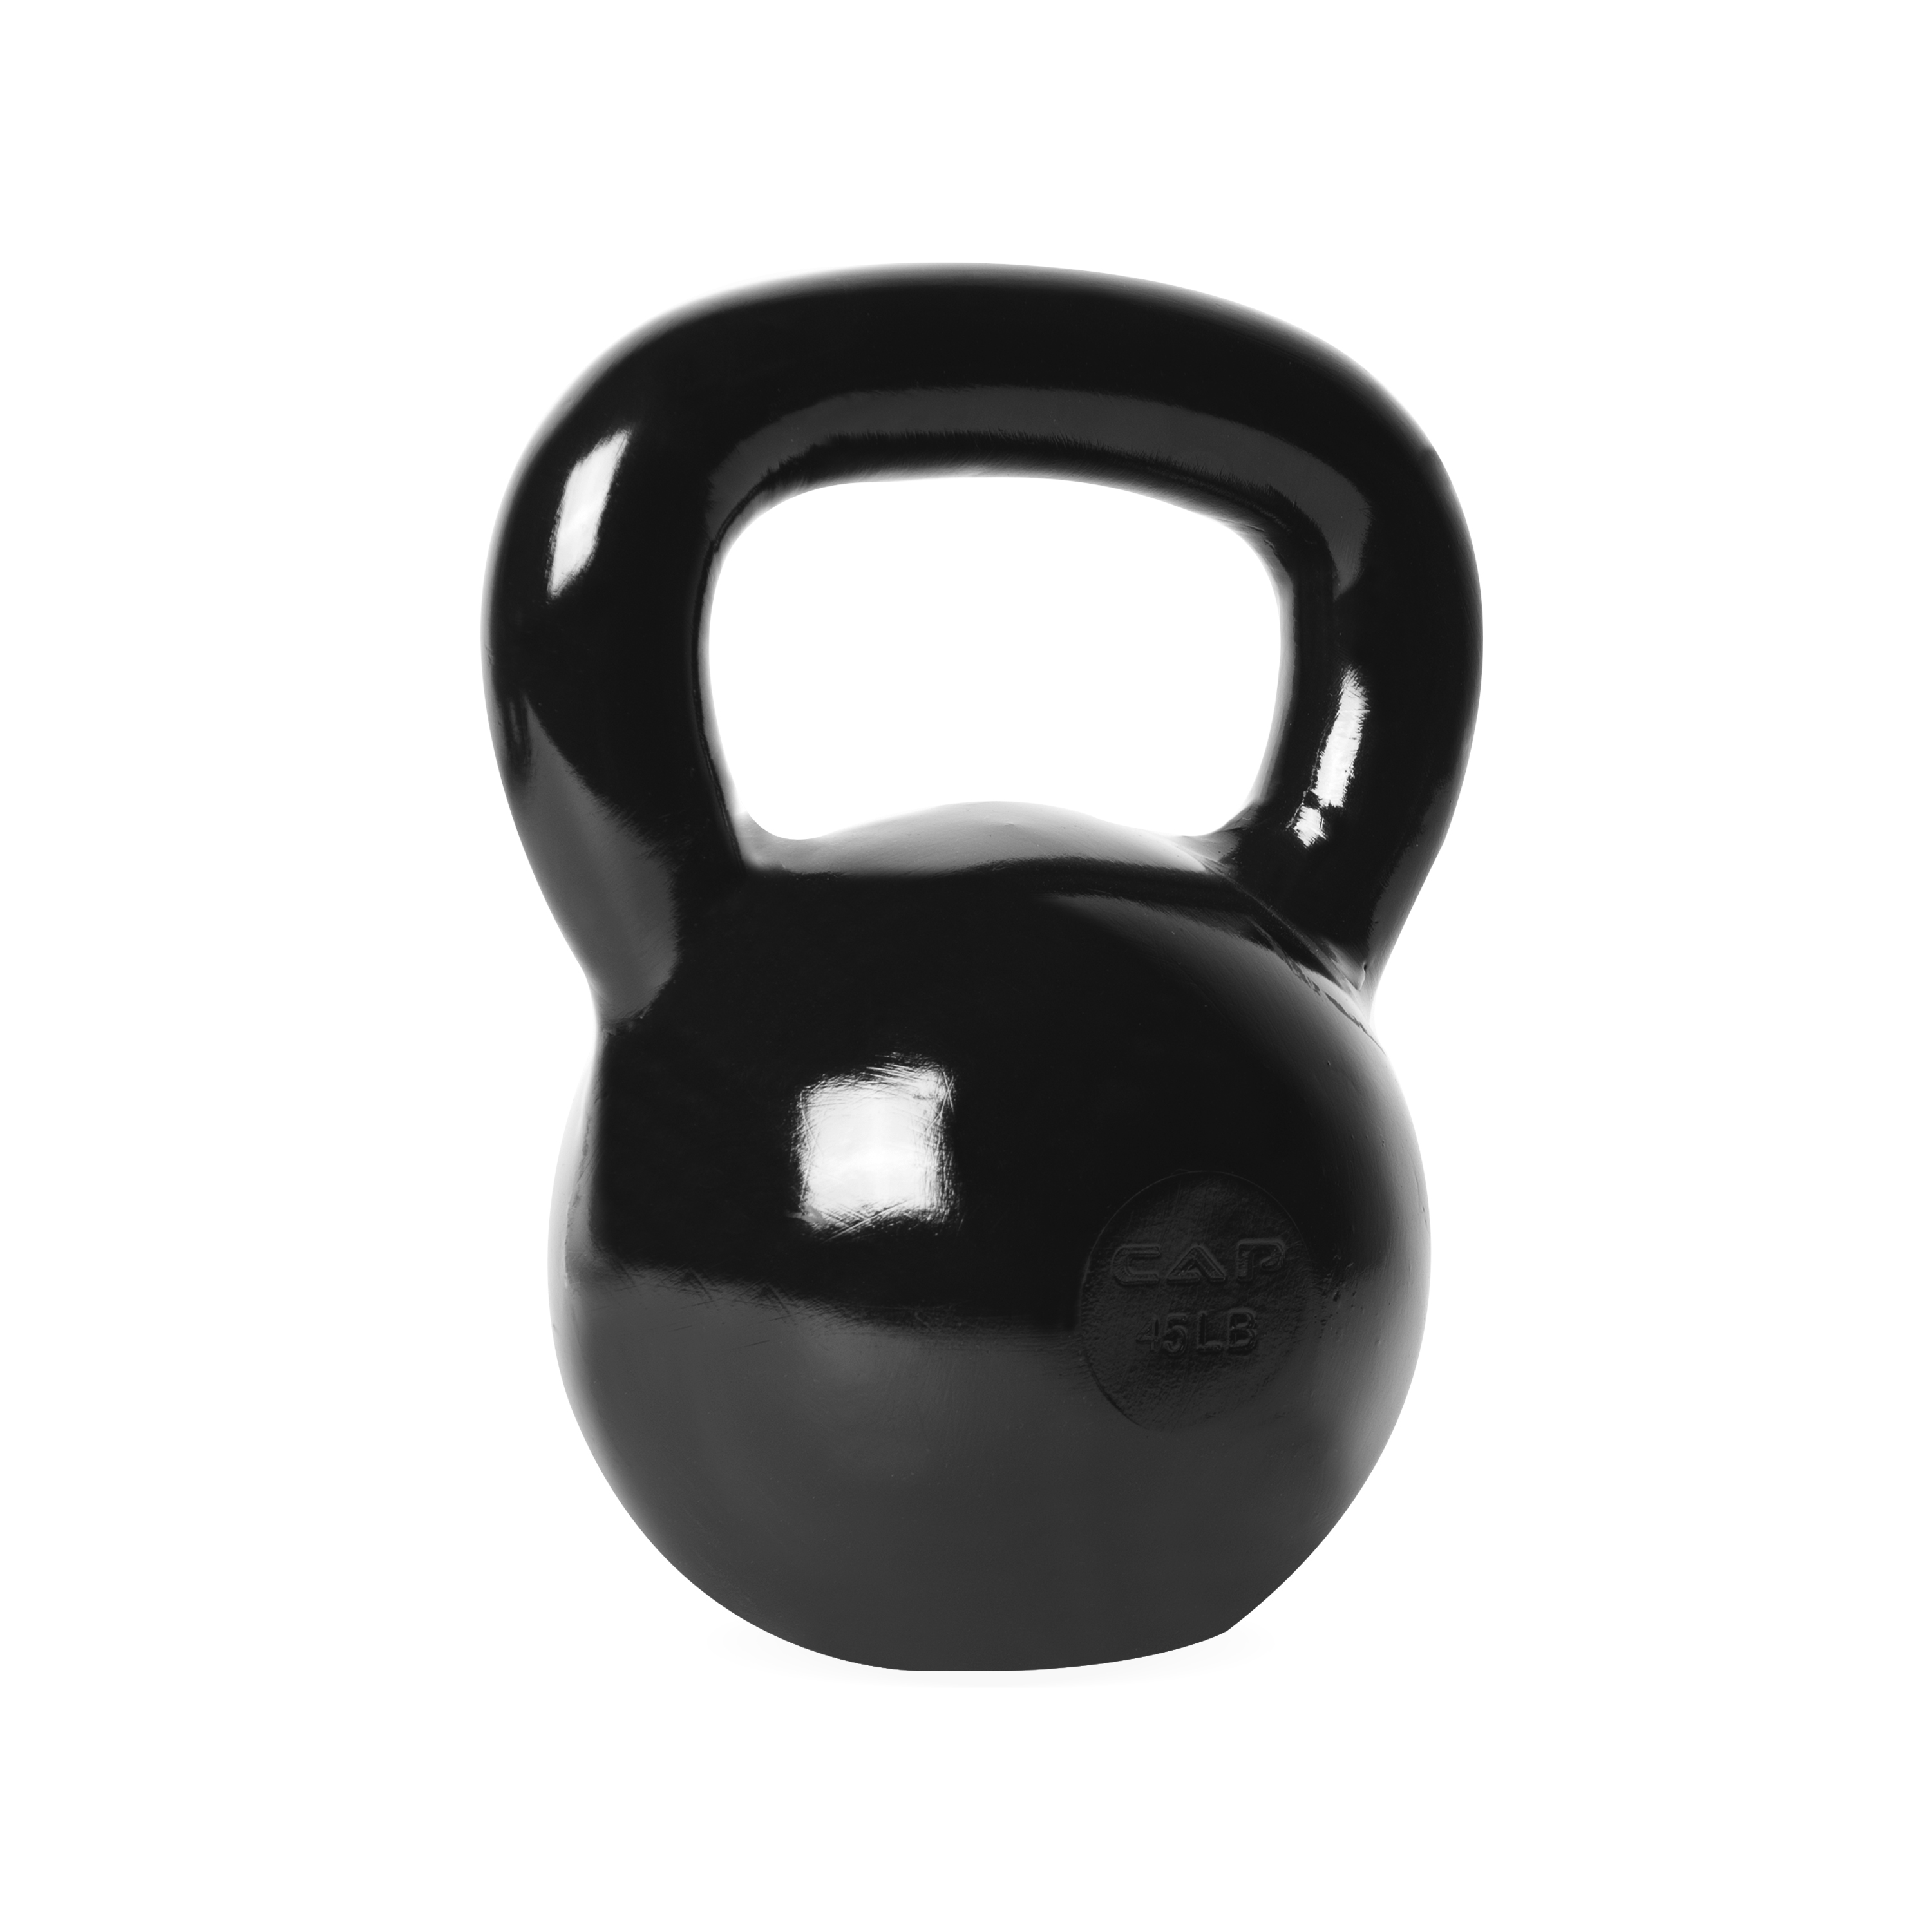 CAP Barbell Cast Iron Kettlebell, Black 45LBS - image 1 of 8